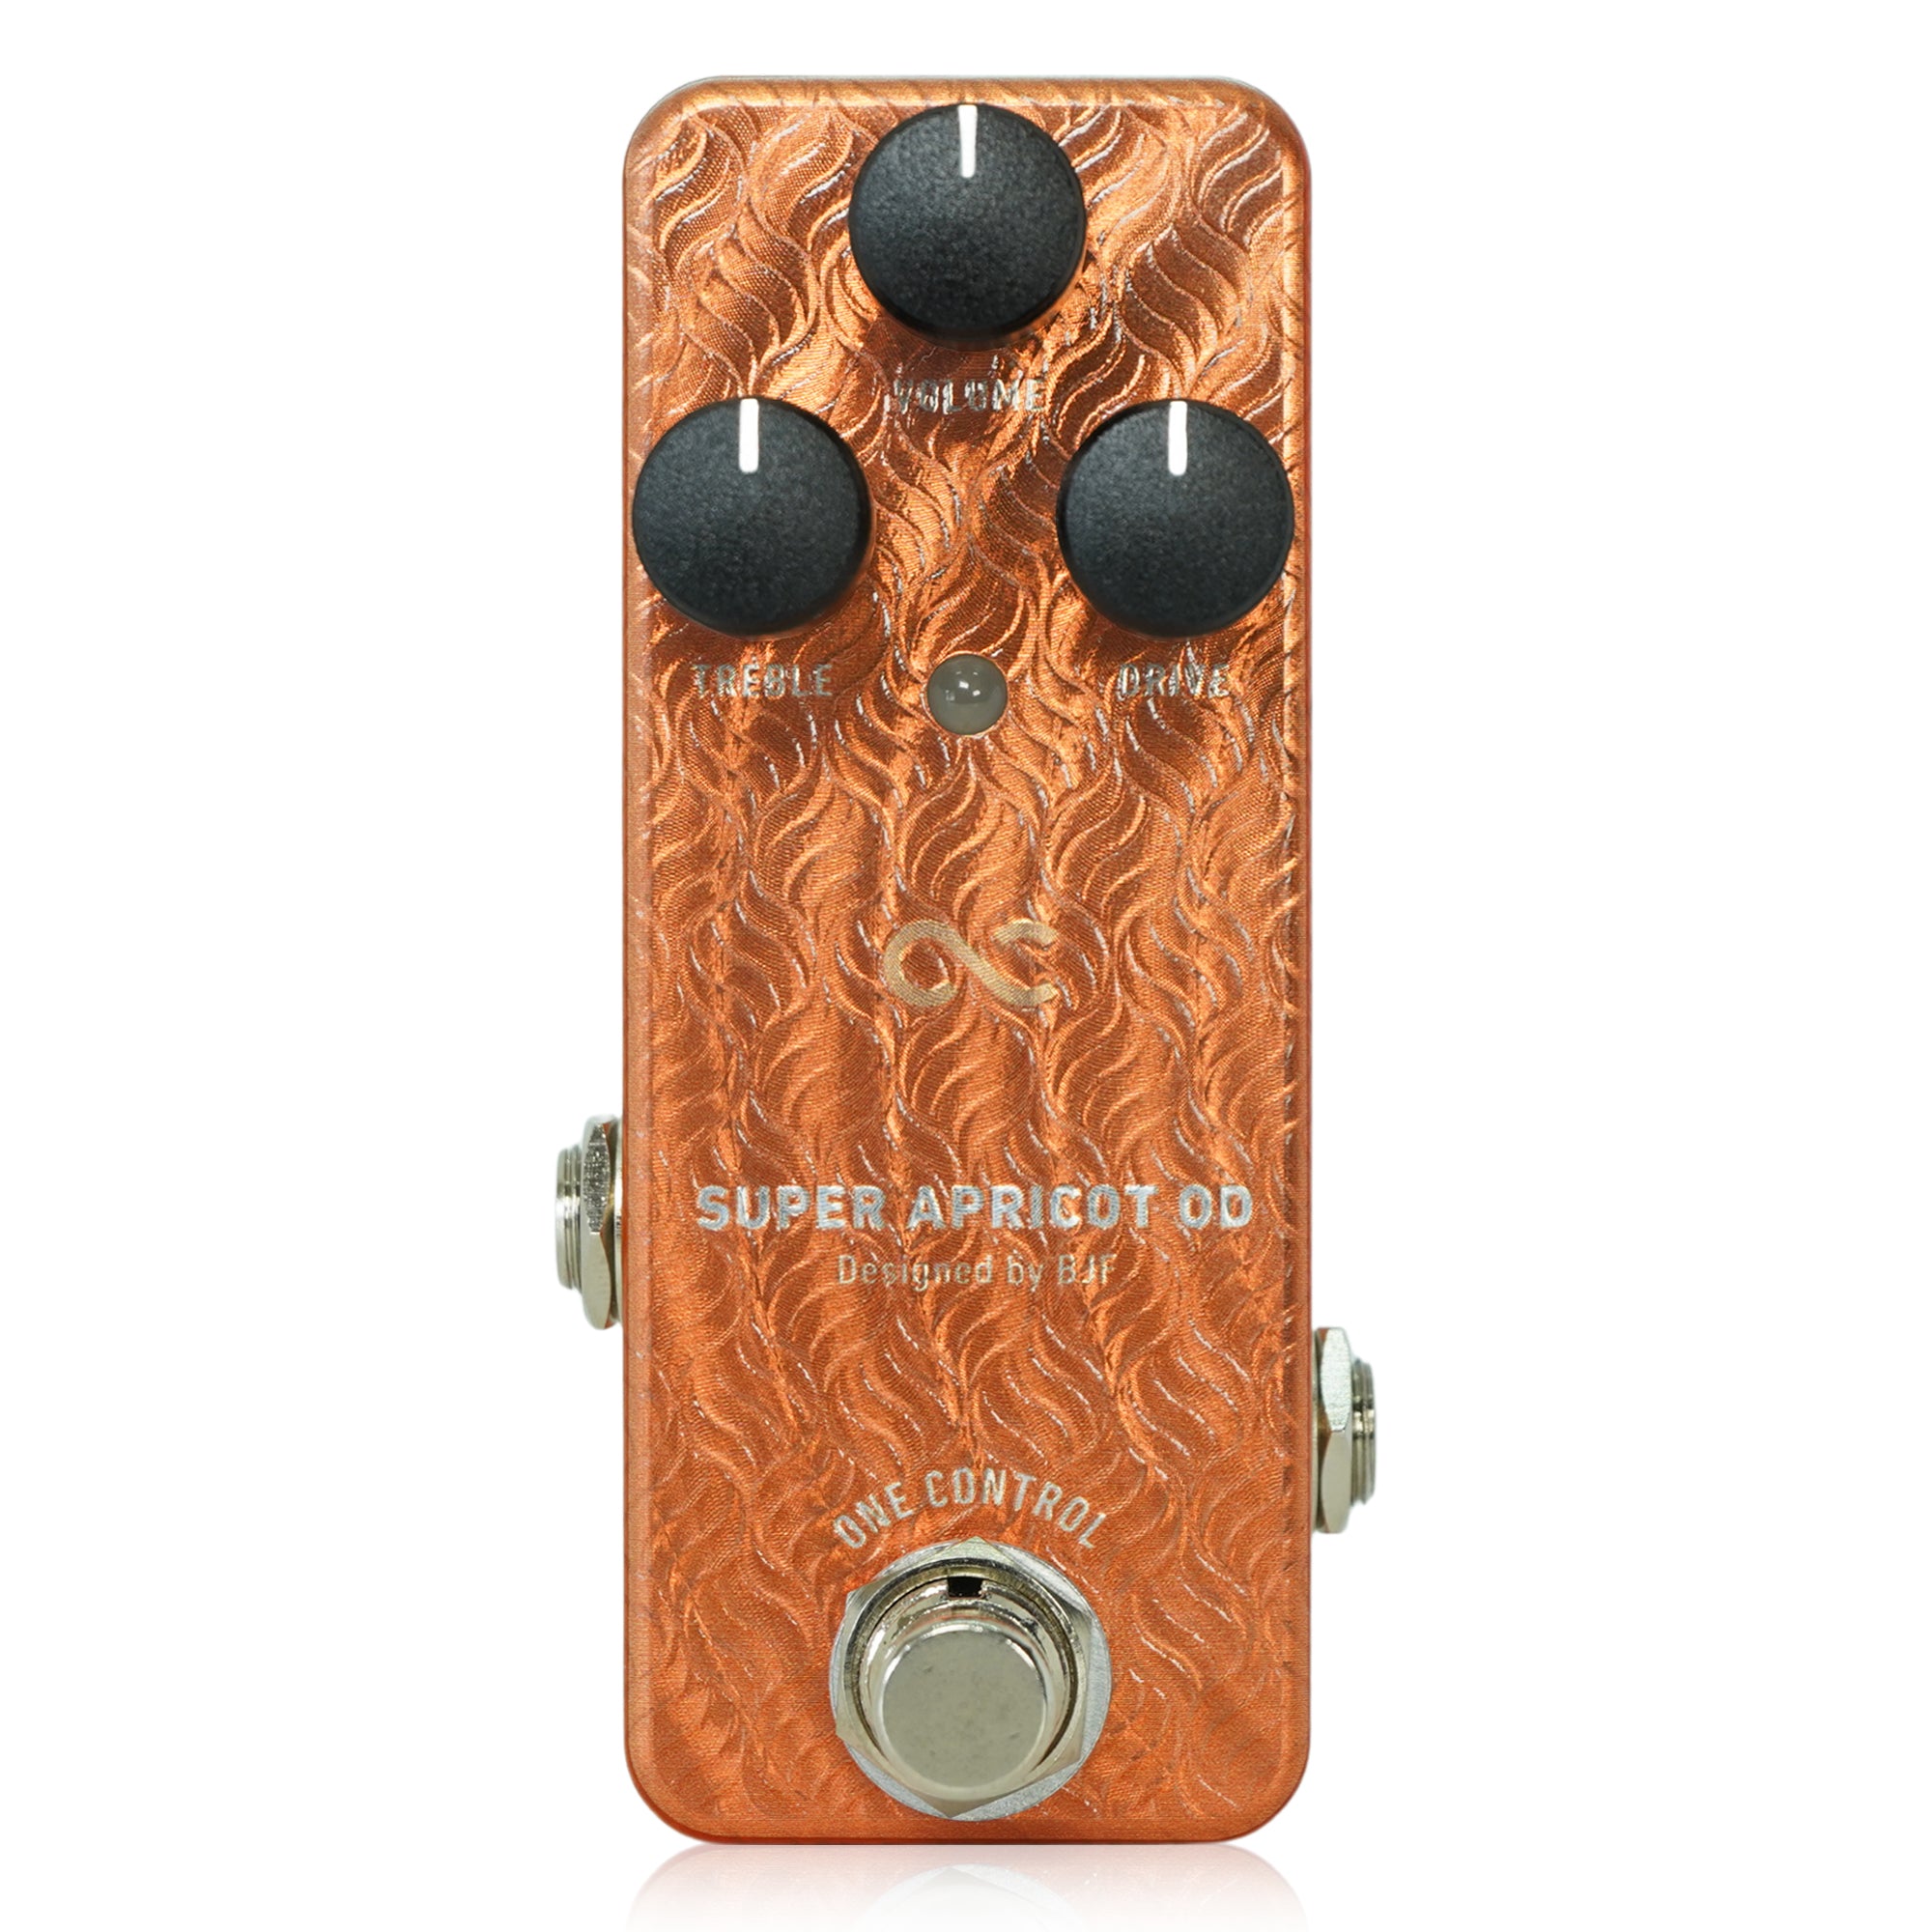 OVERDRIVE – One Control USA